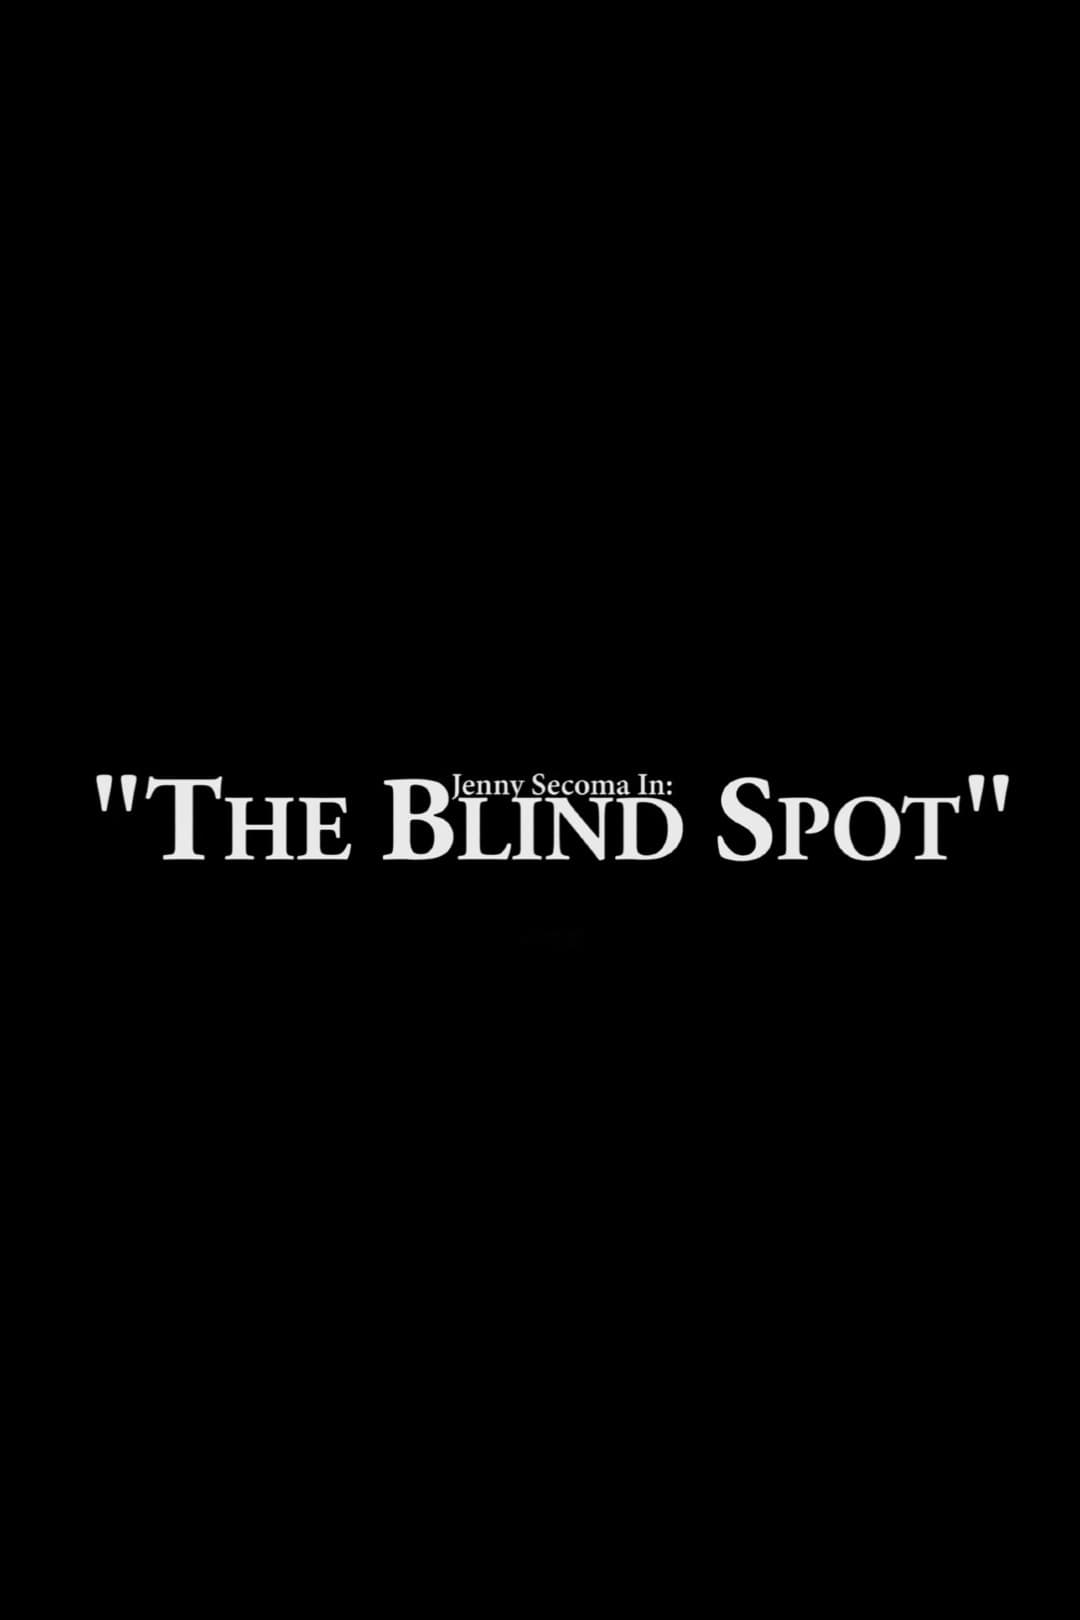 Jenny Secoma In: The Blind Spot